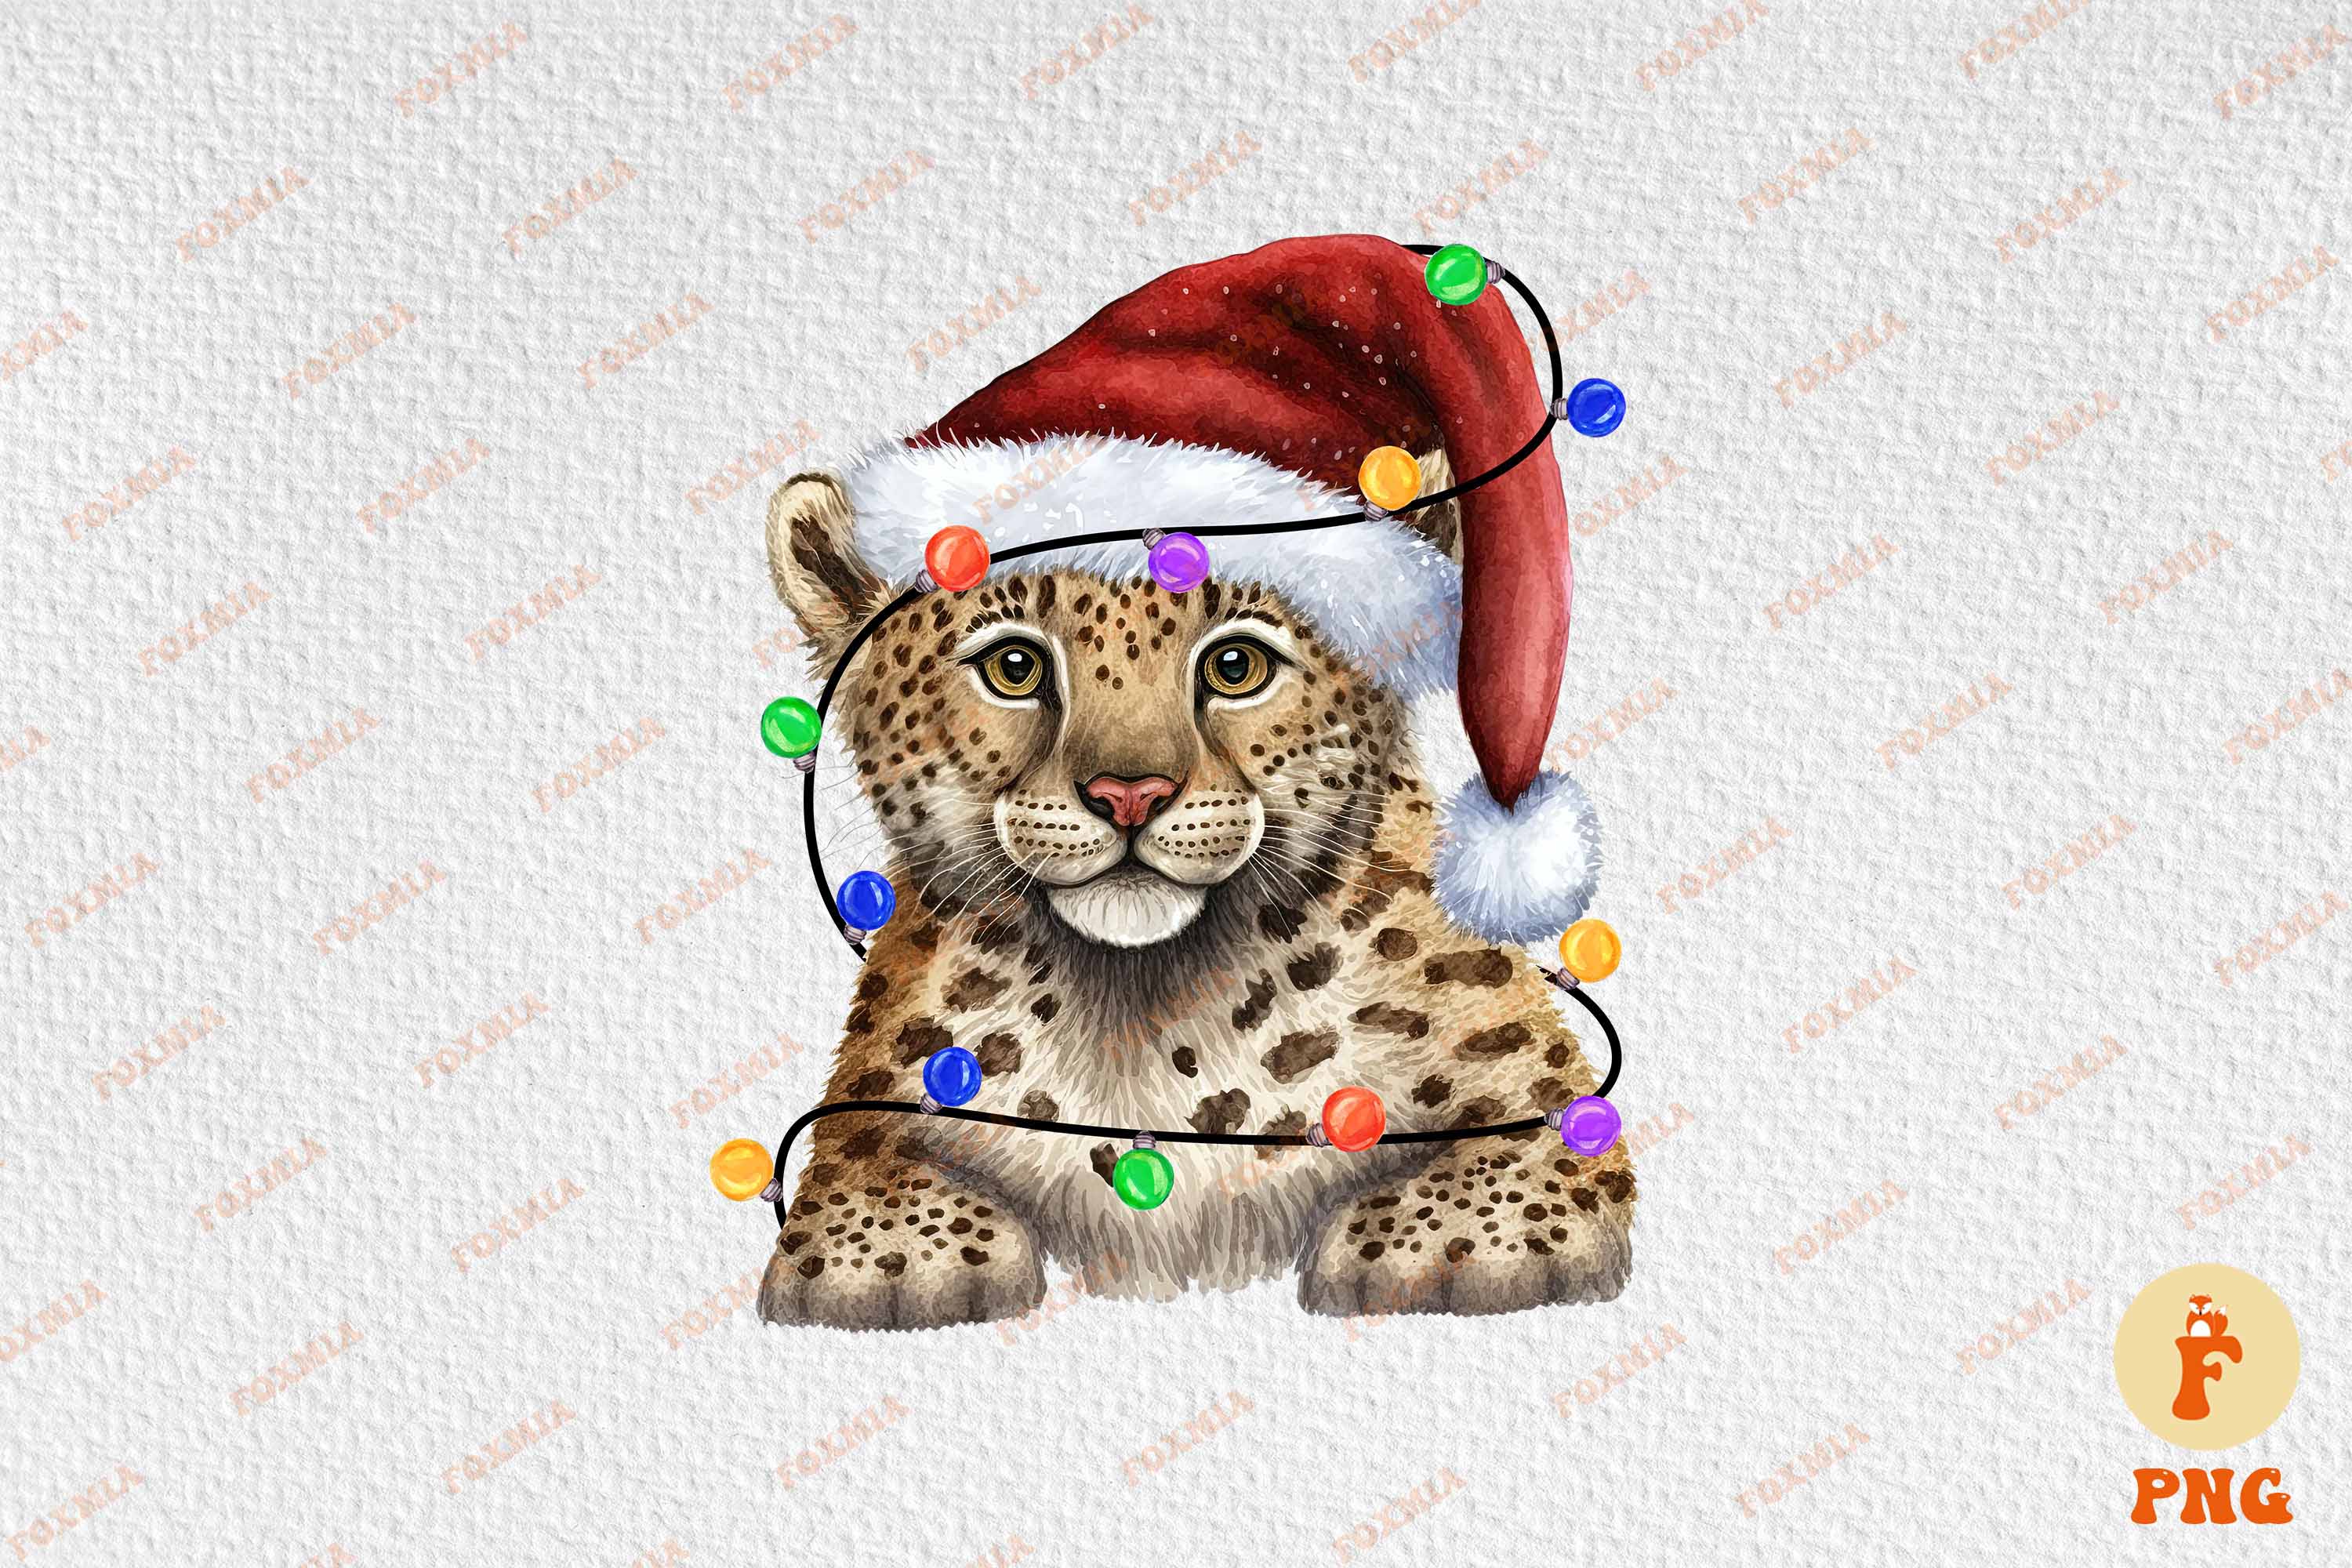 Amazing image of a leopard wearing a santa hat.